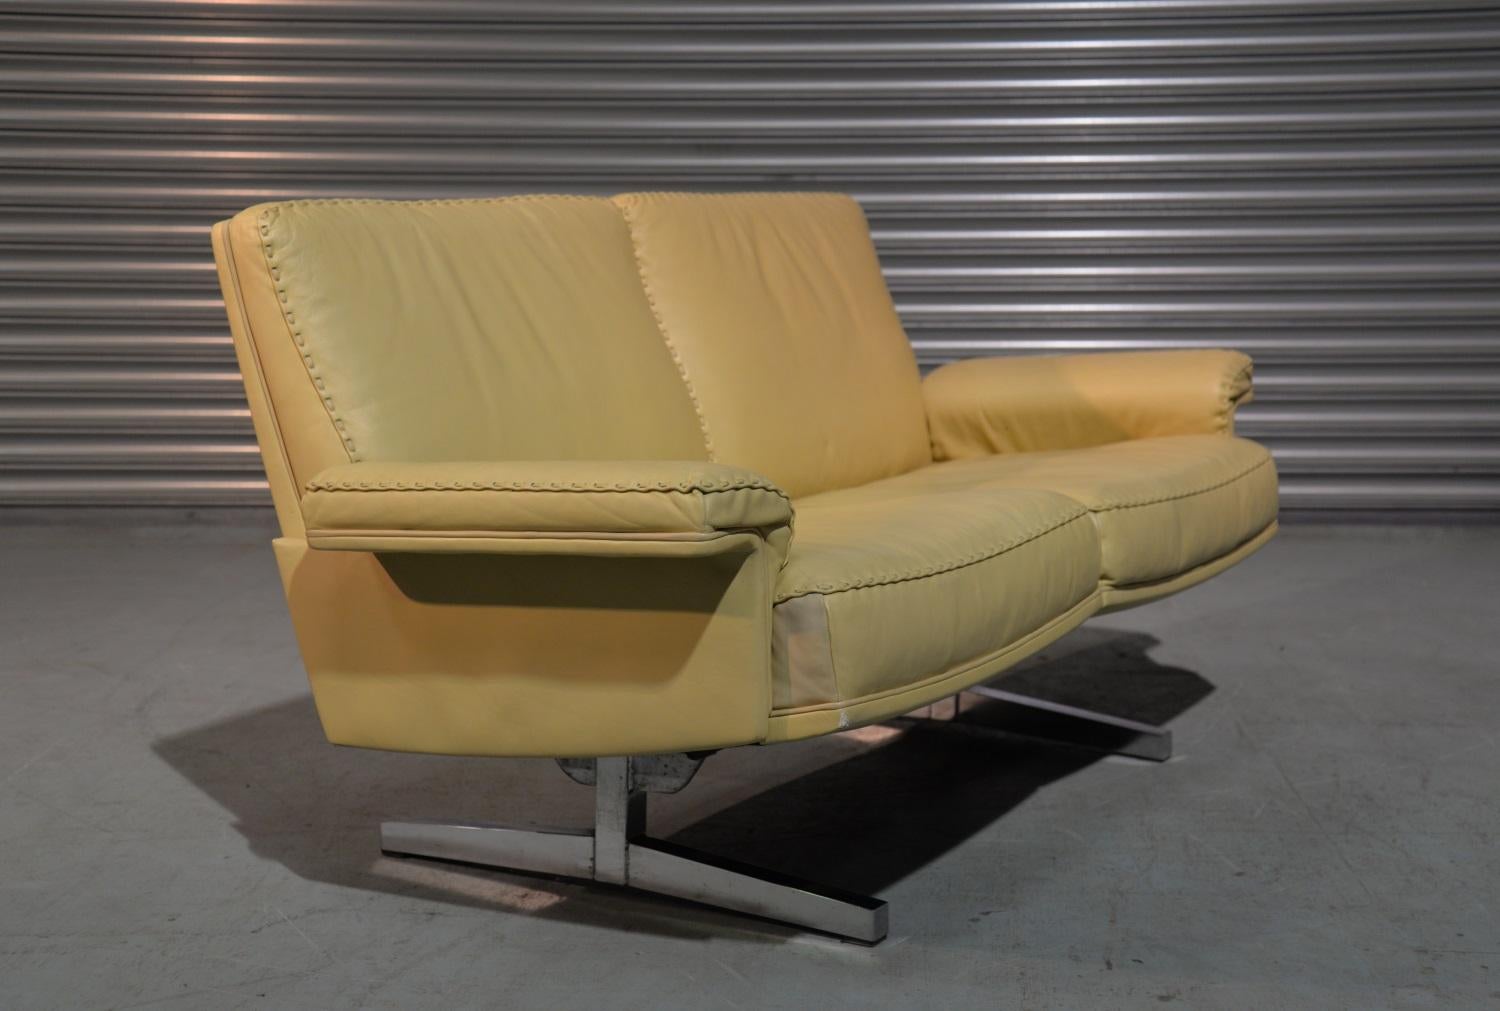 Vintage De Sede DS 35 Two-Seat Sofa or Loveseat, Swizerland 1970s For Sale 1